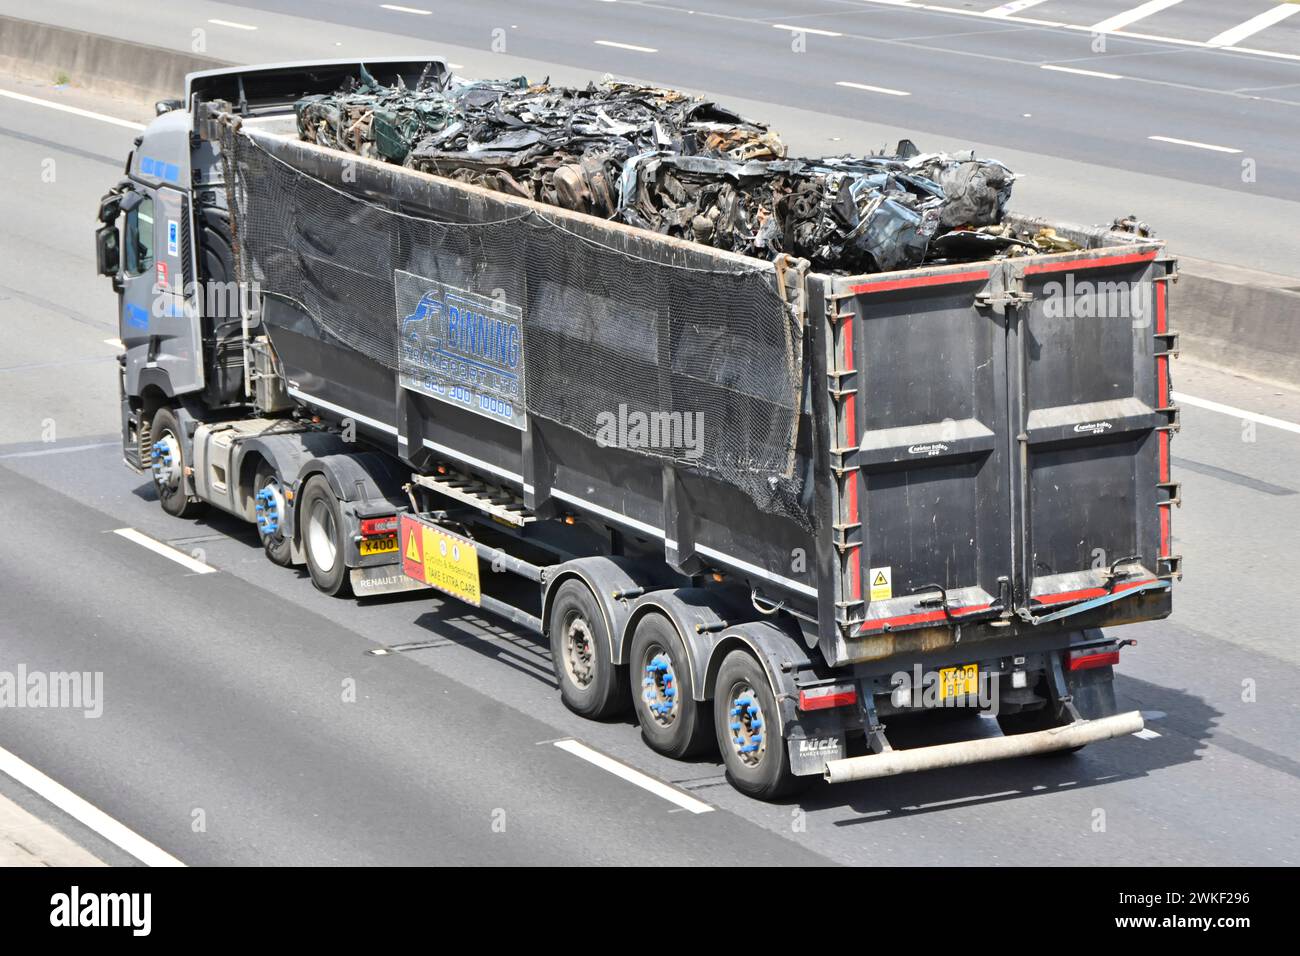 Renault hgv lorry in motion open top tipping semi trailer truck combination aerial side back rear view load of scrap metal on M25 motorway England UK Stock Photo